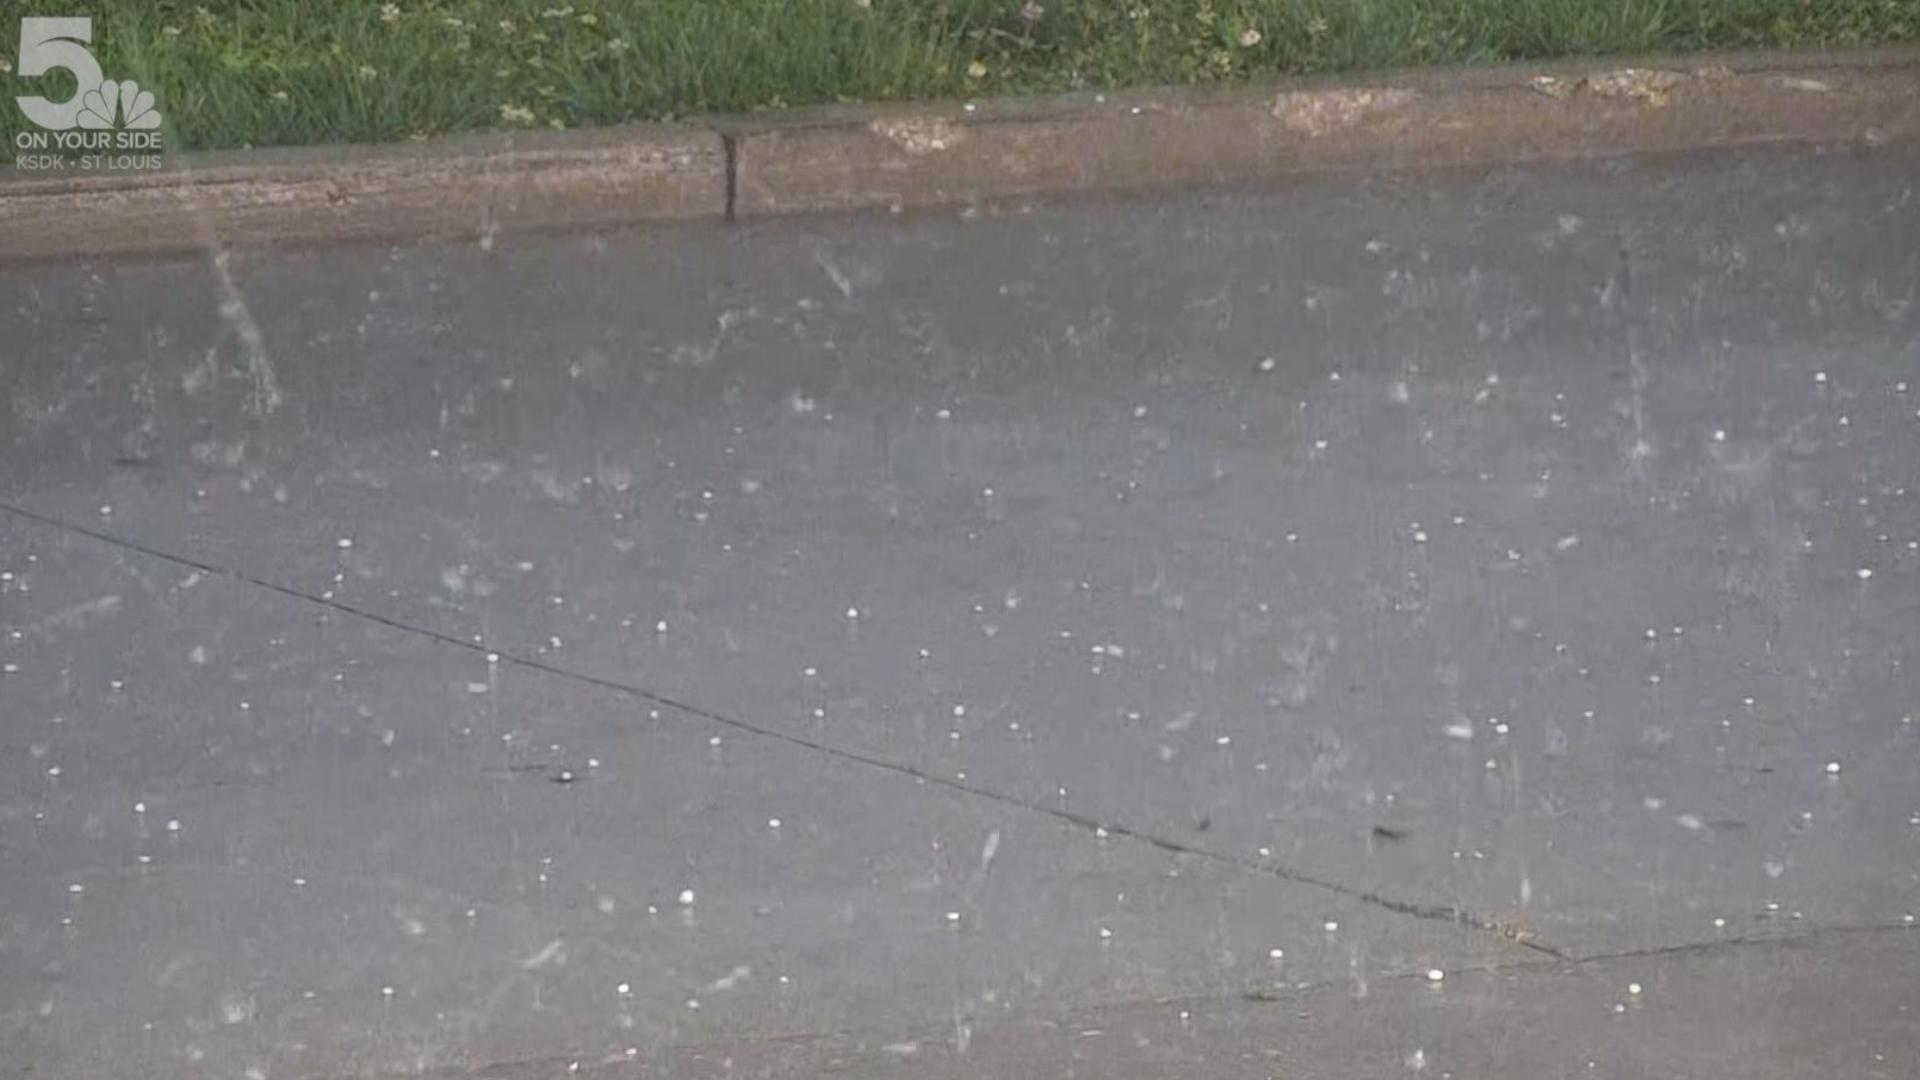 Video from the 5 On Your Side Storm Tracker shows hail in the Jefferson County, Missouri, area. Storms hit the St. Louis region throughout the day Wednesday.